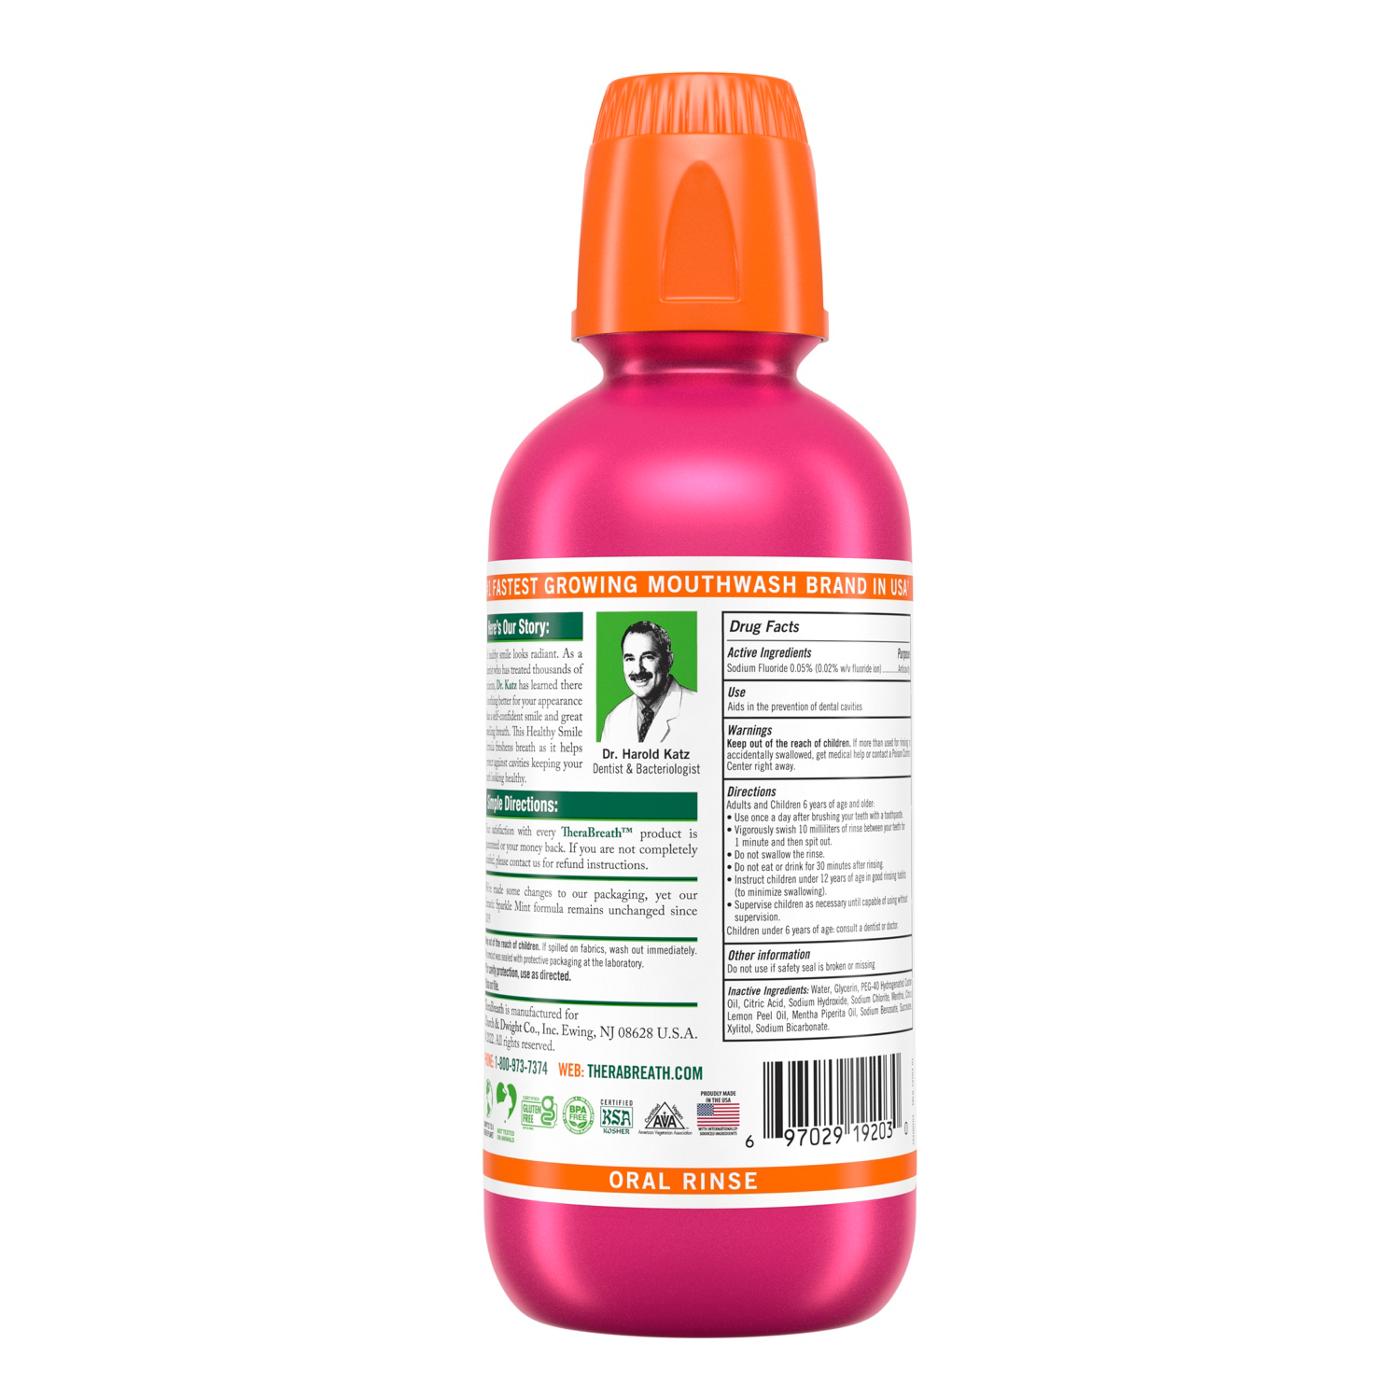 TheraBreath Anticavity Fluoride Mouthwash - Sparkle Mint; image 2 of 5